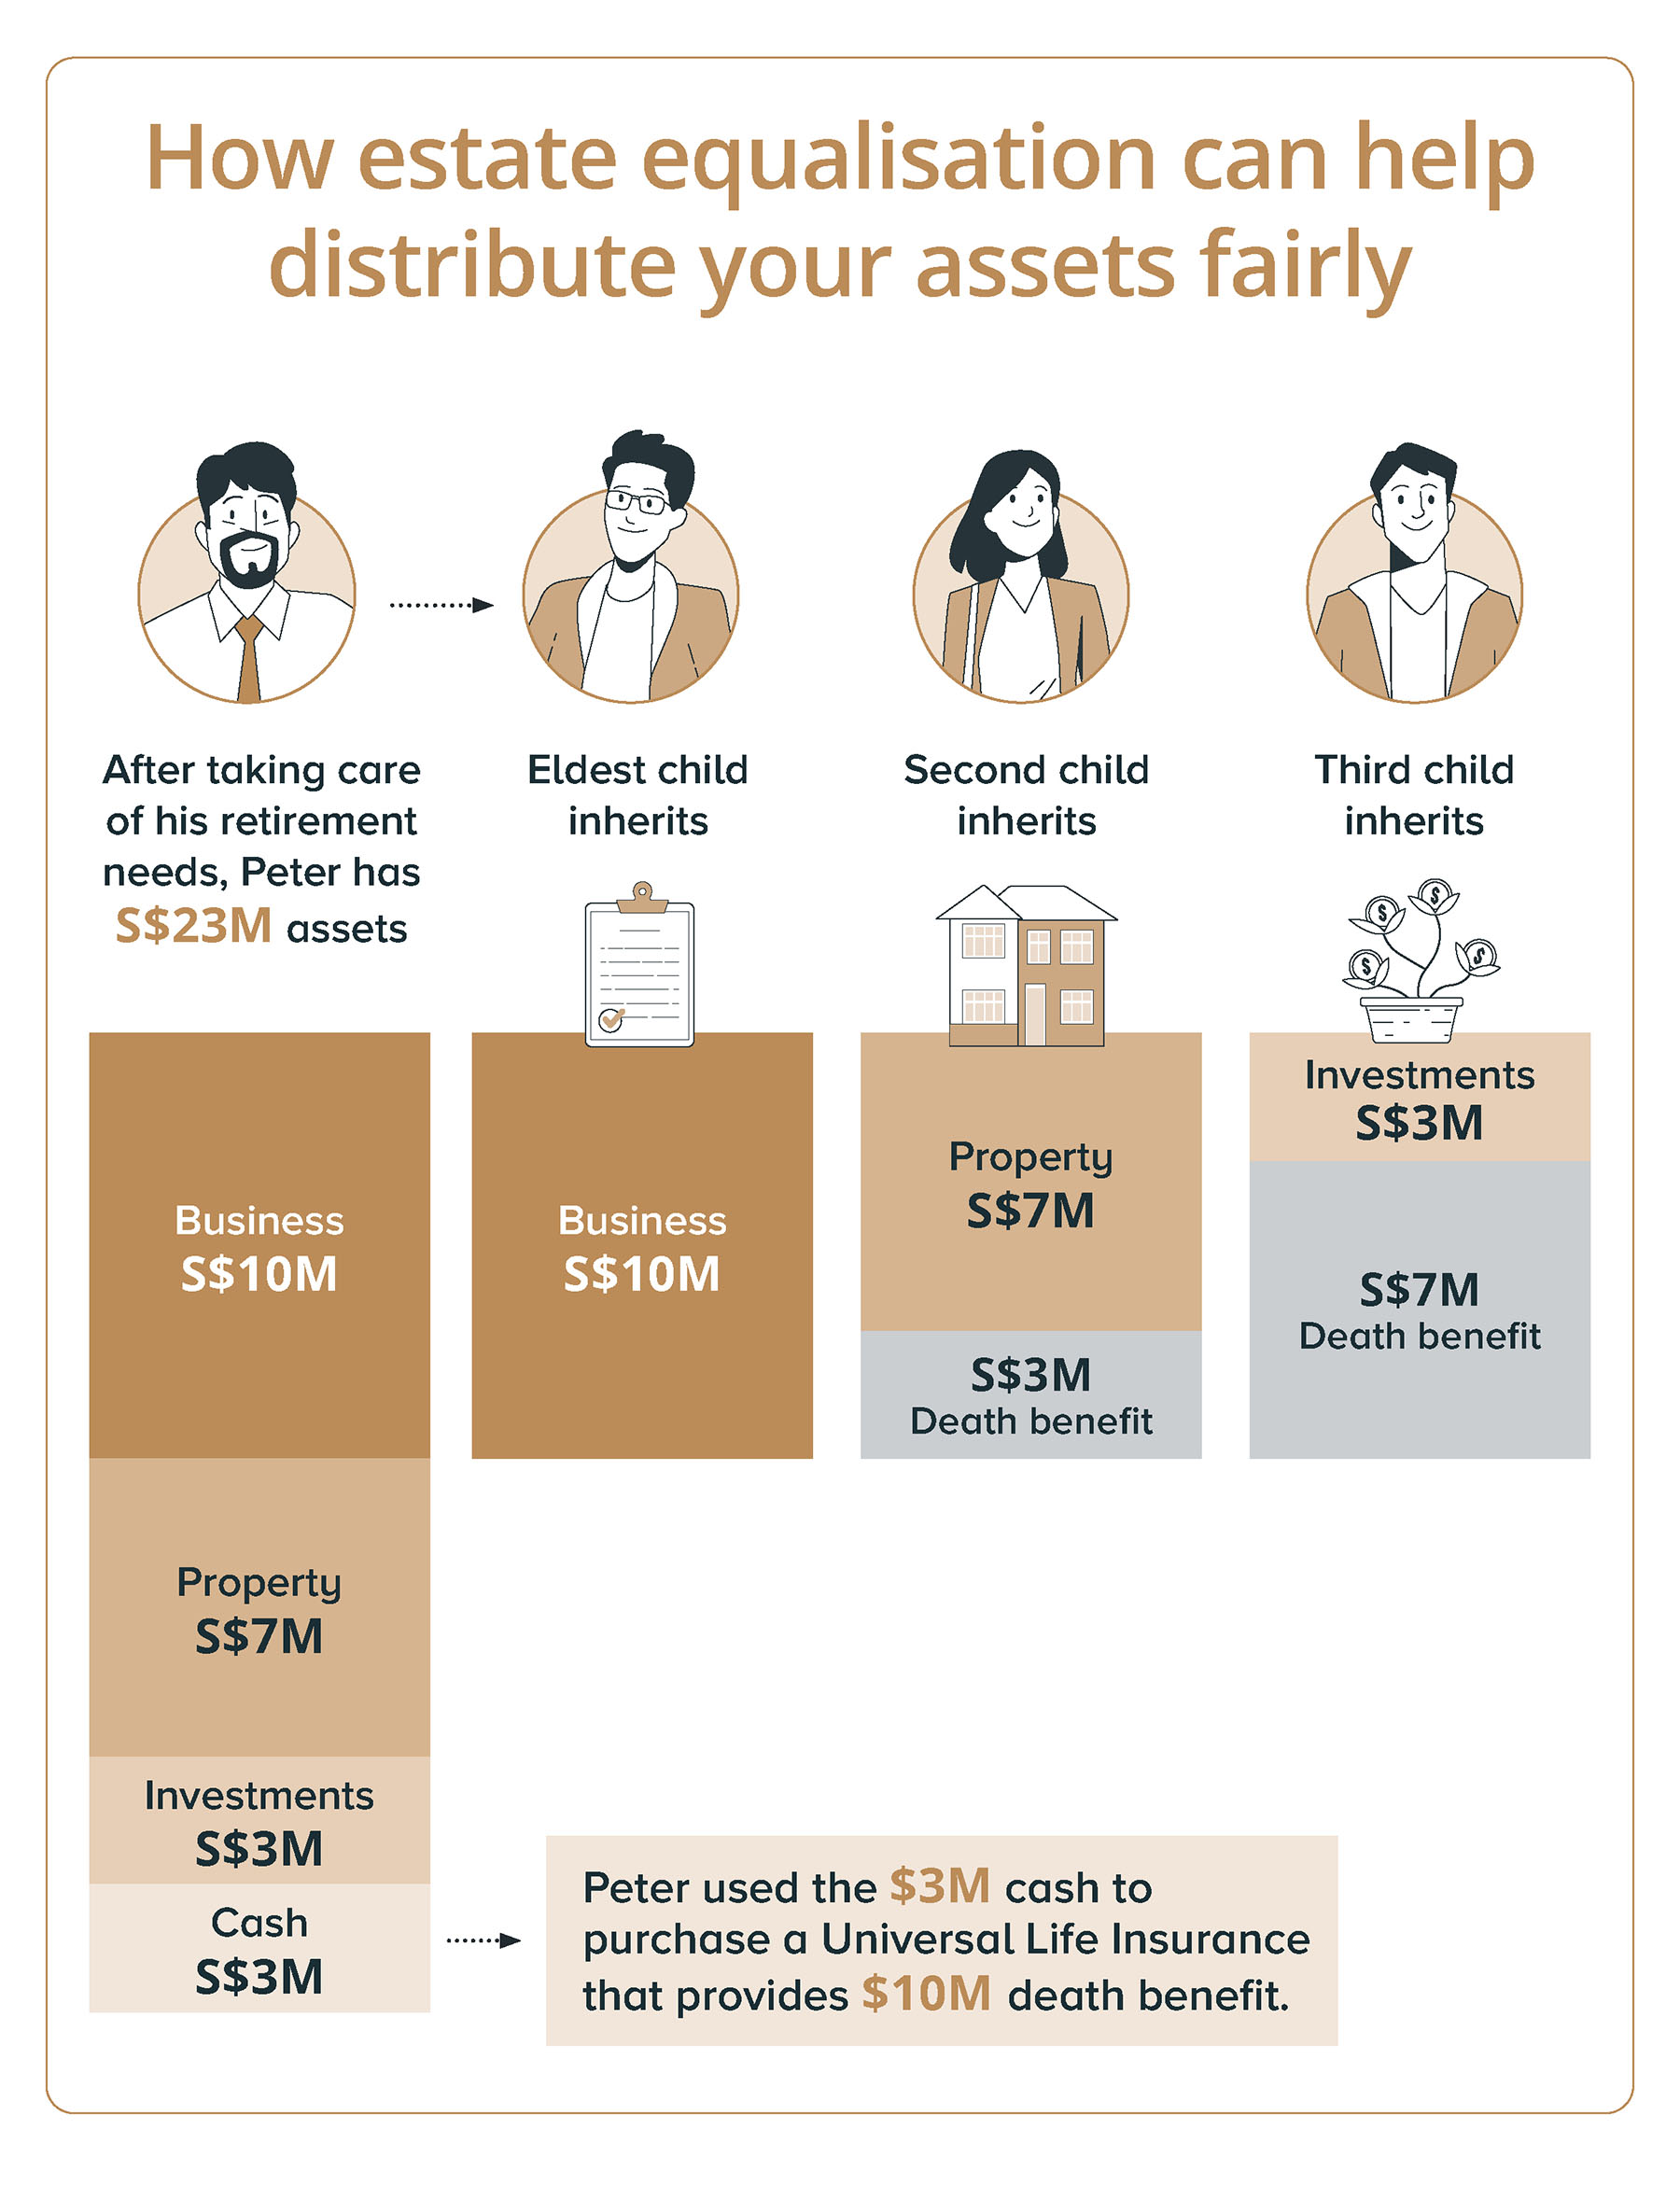 Applying the technique of estate equalisation allows you to distribute wealth equally even when your assets cannot be easily and quickly converted into cash.